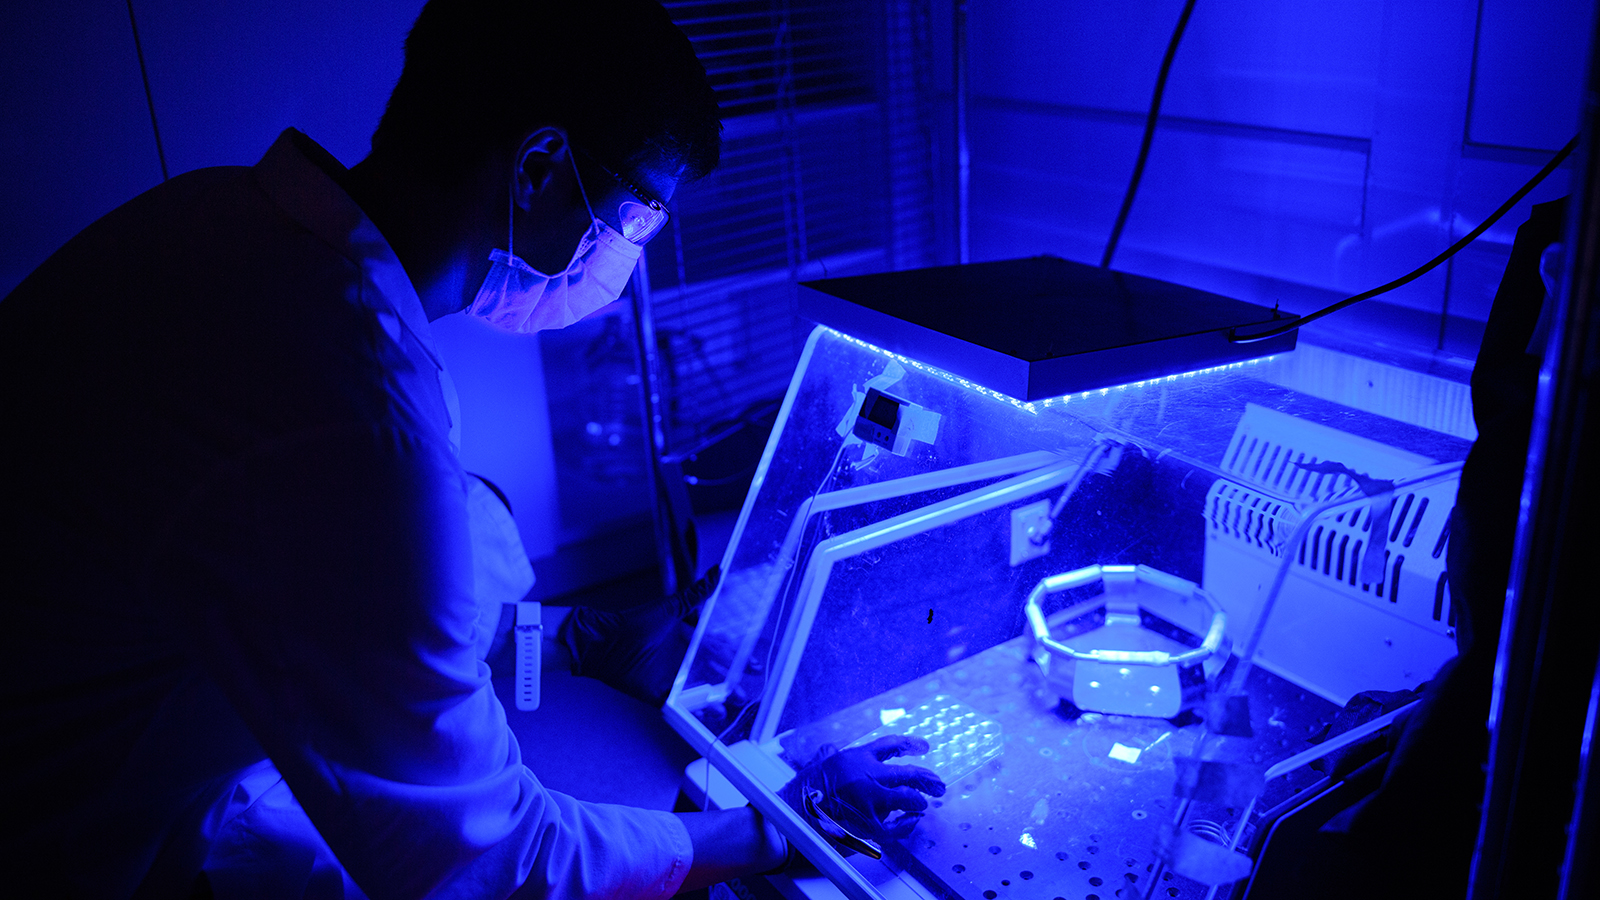 Makato Lalwani works with microbes in the Avalos lab. (Photo by Sameer A. Khan / Fotobuddy)